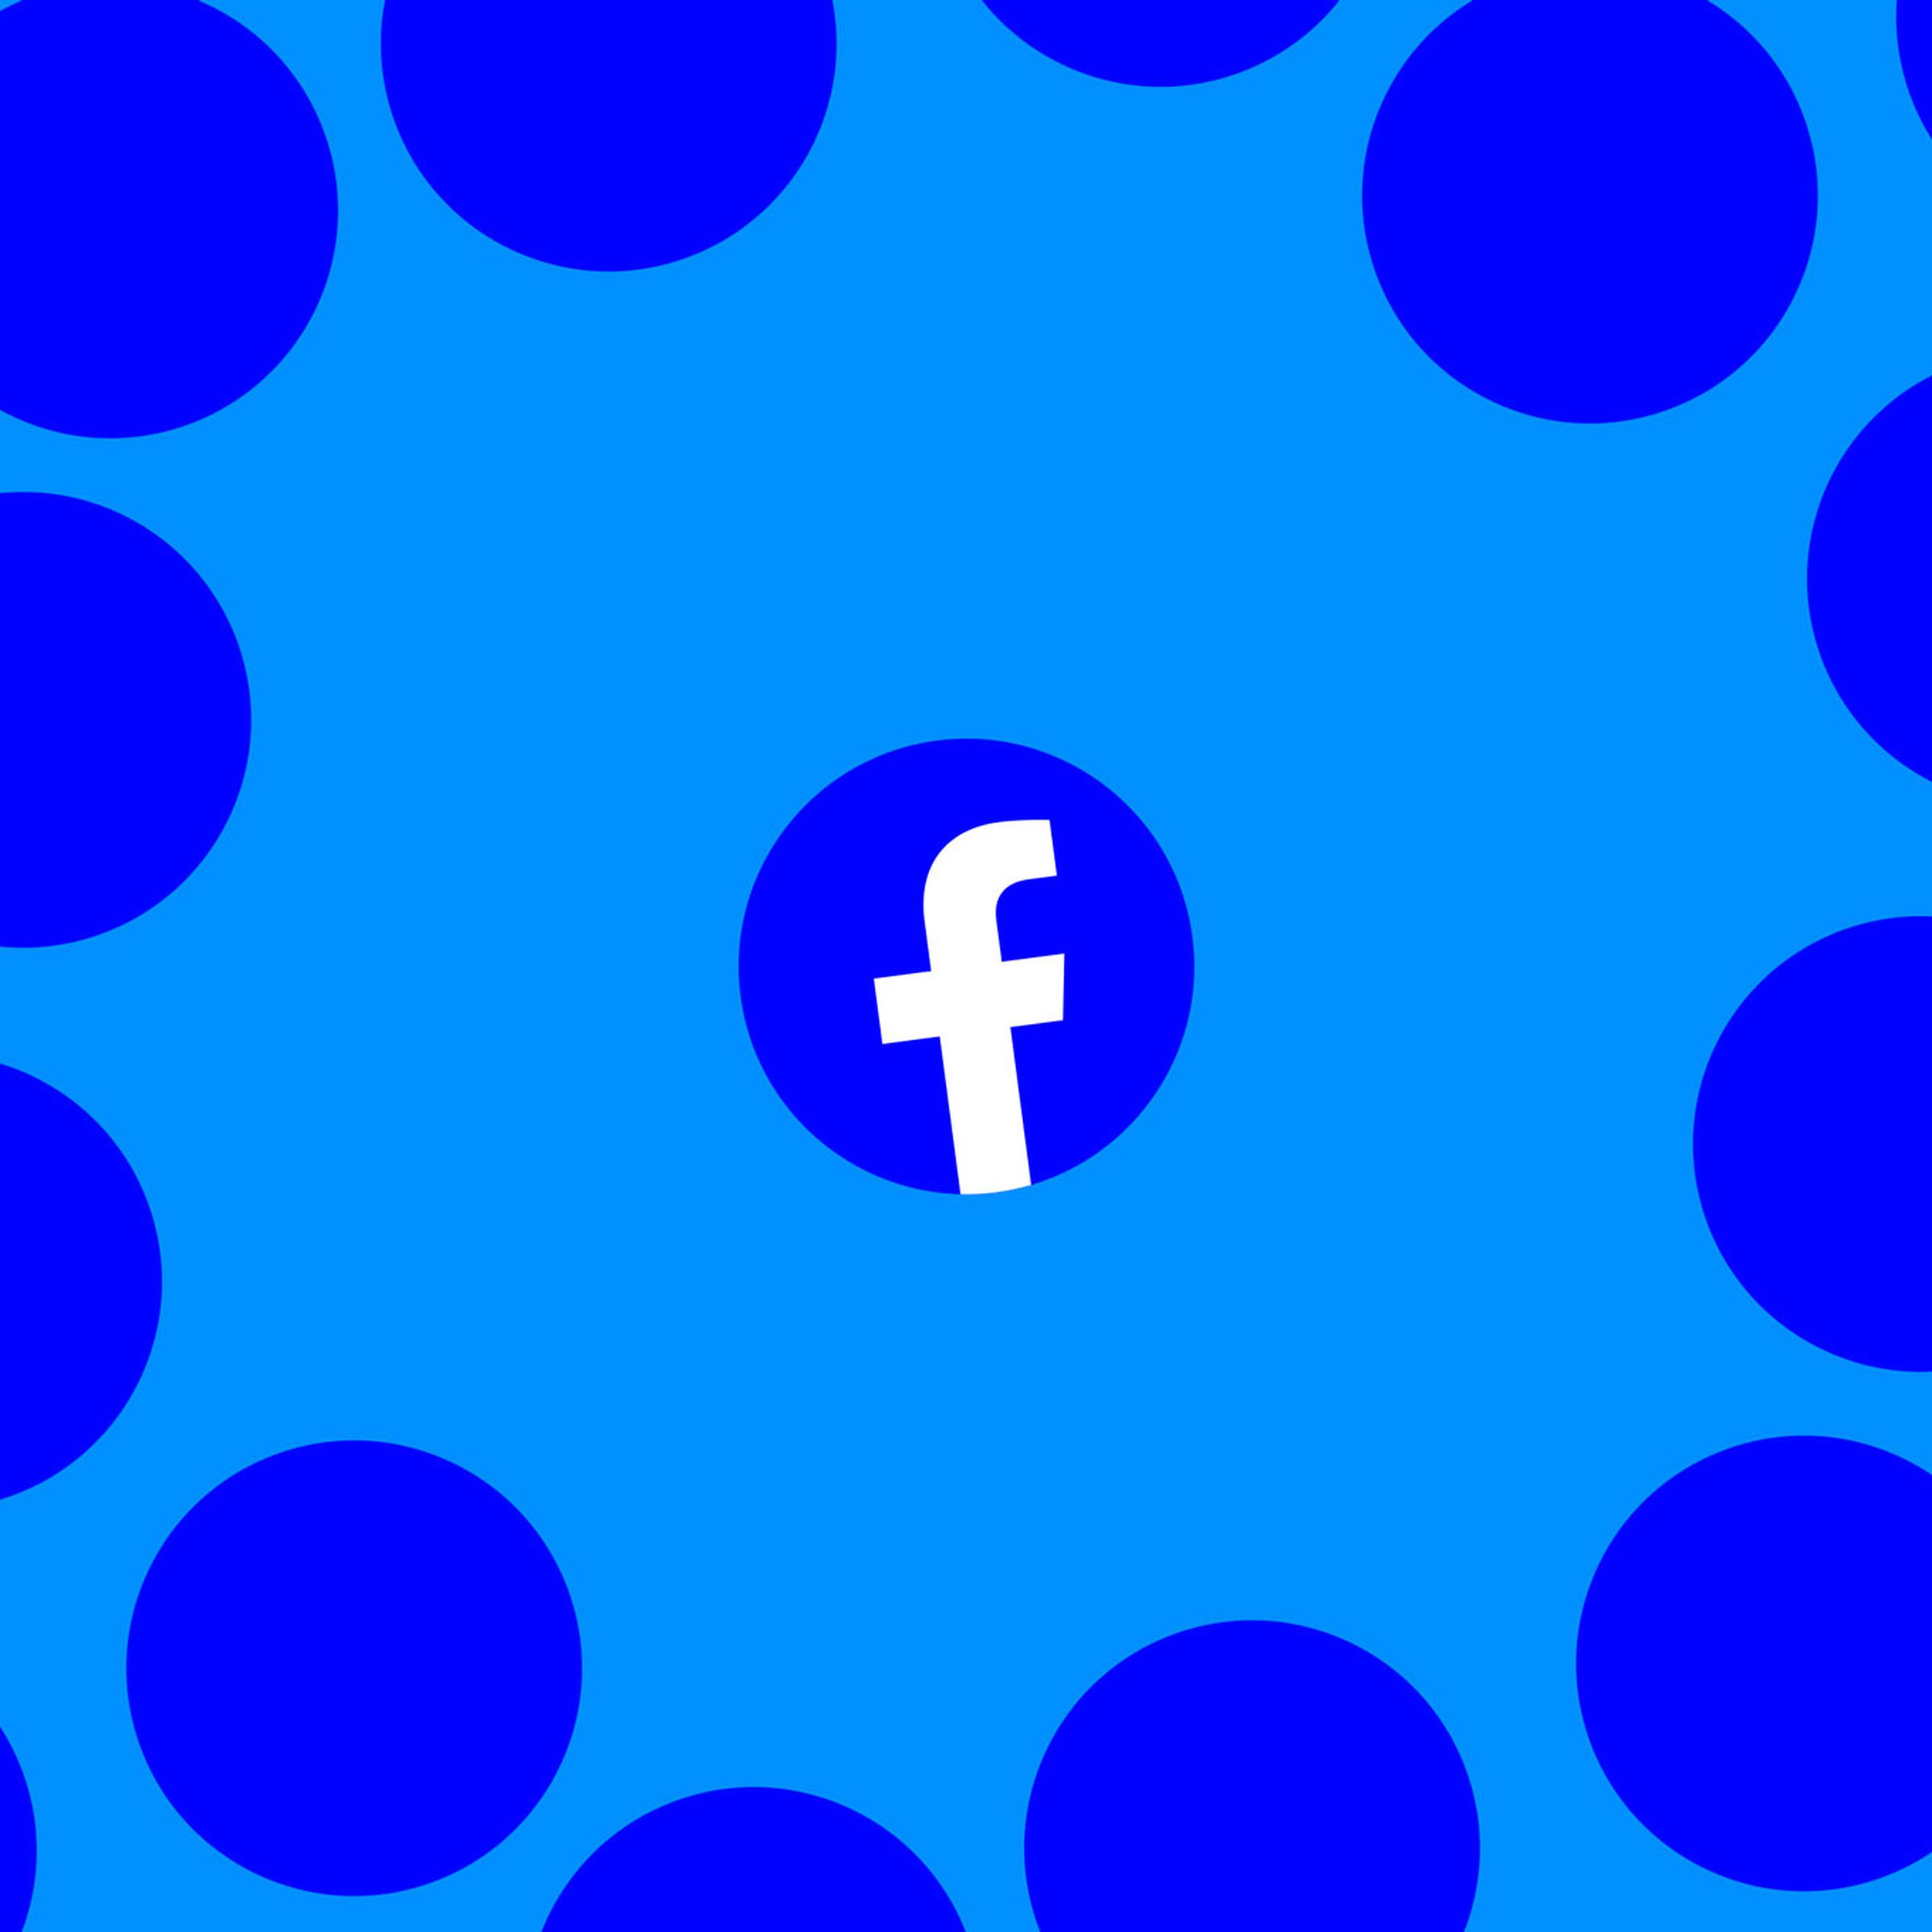 An image showing the Facebook logo surrounded by blue circles